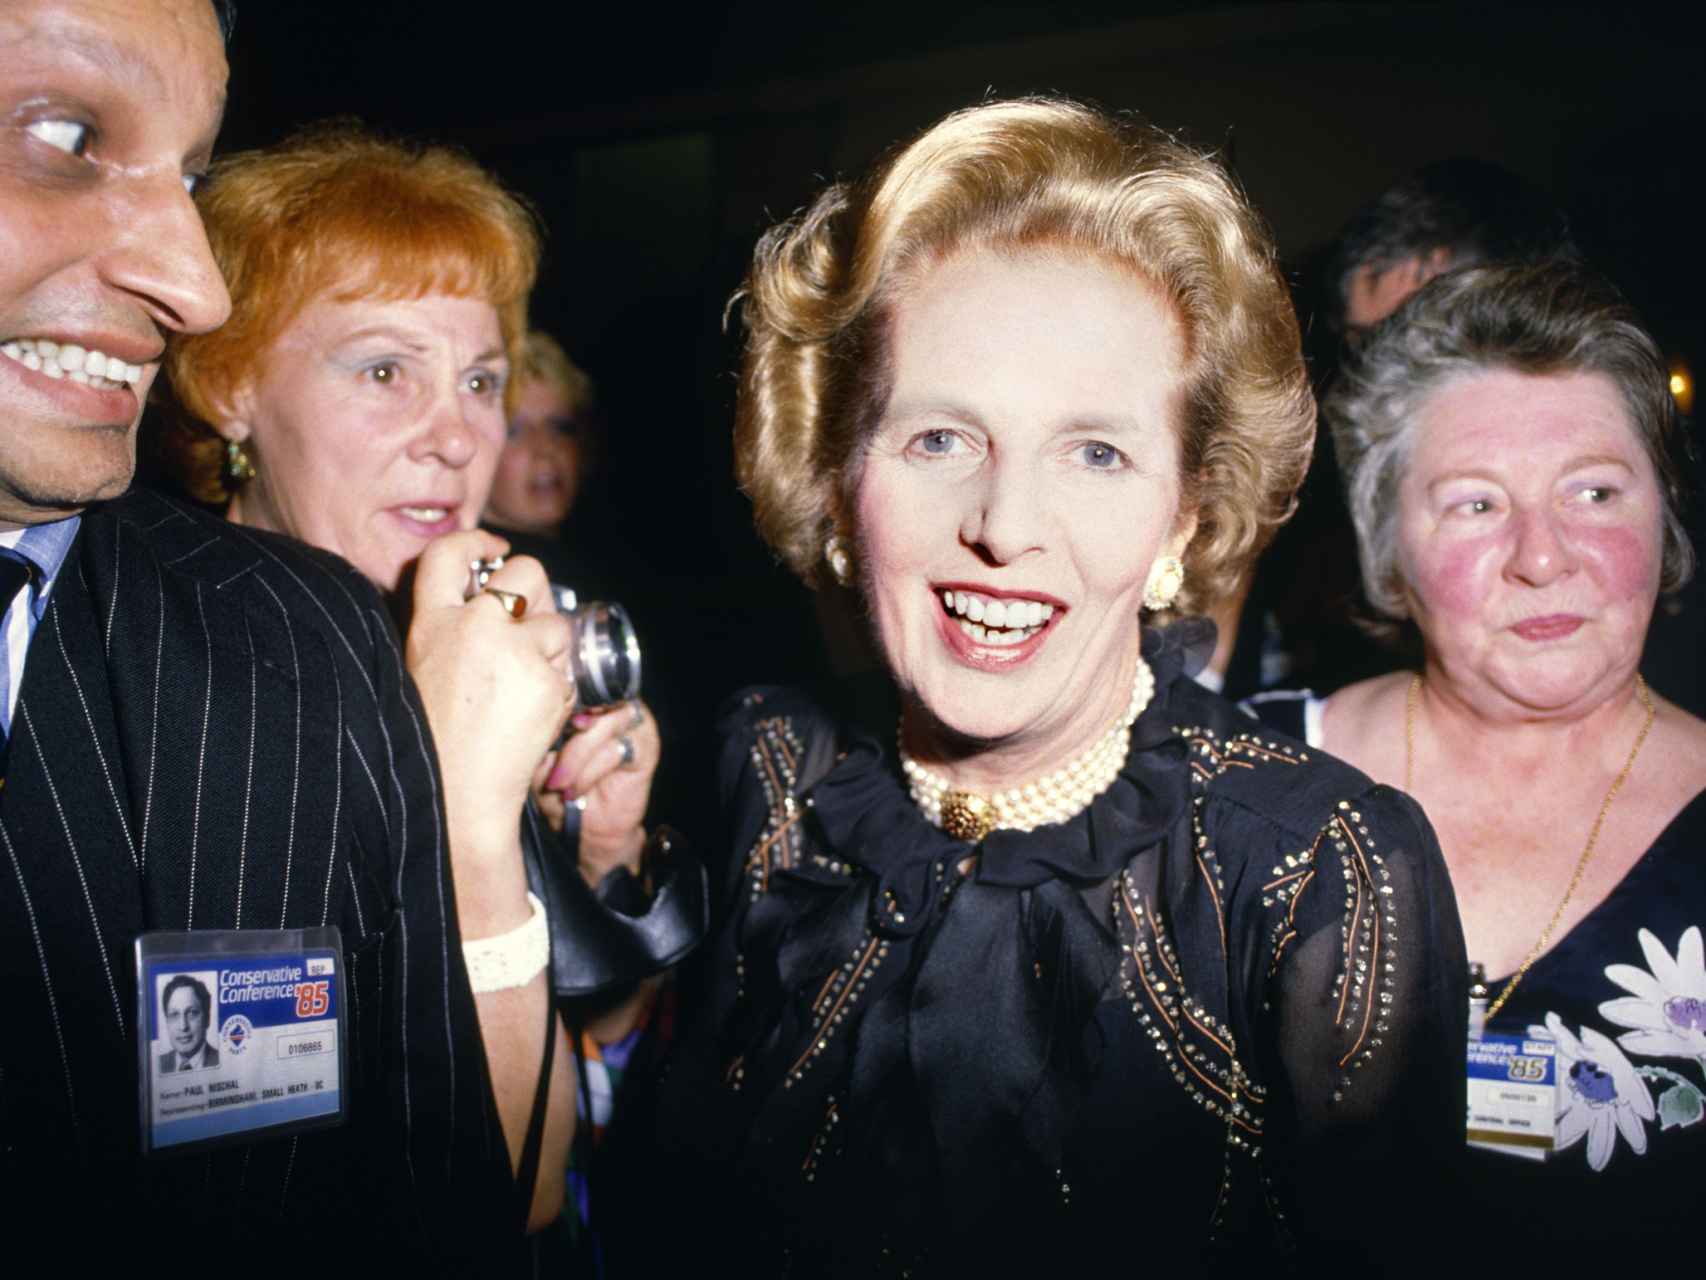 Prime Minister Margaret Thatcher during the Conservative Party Conference, 1985.